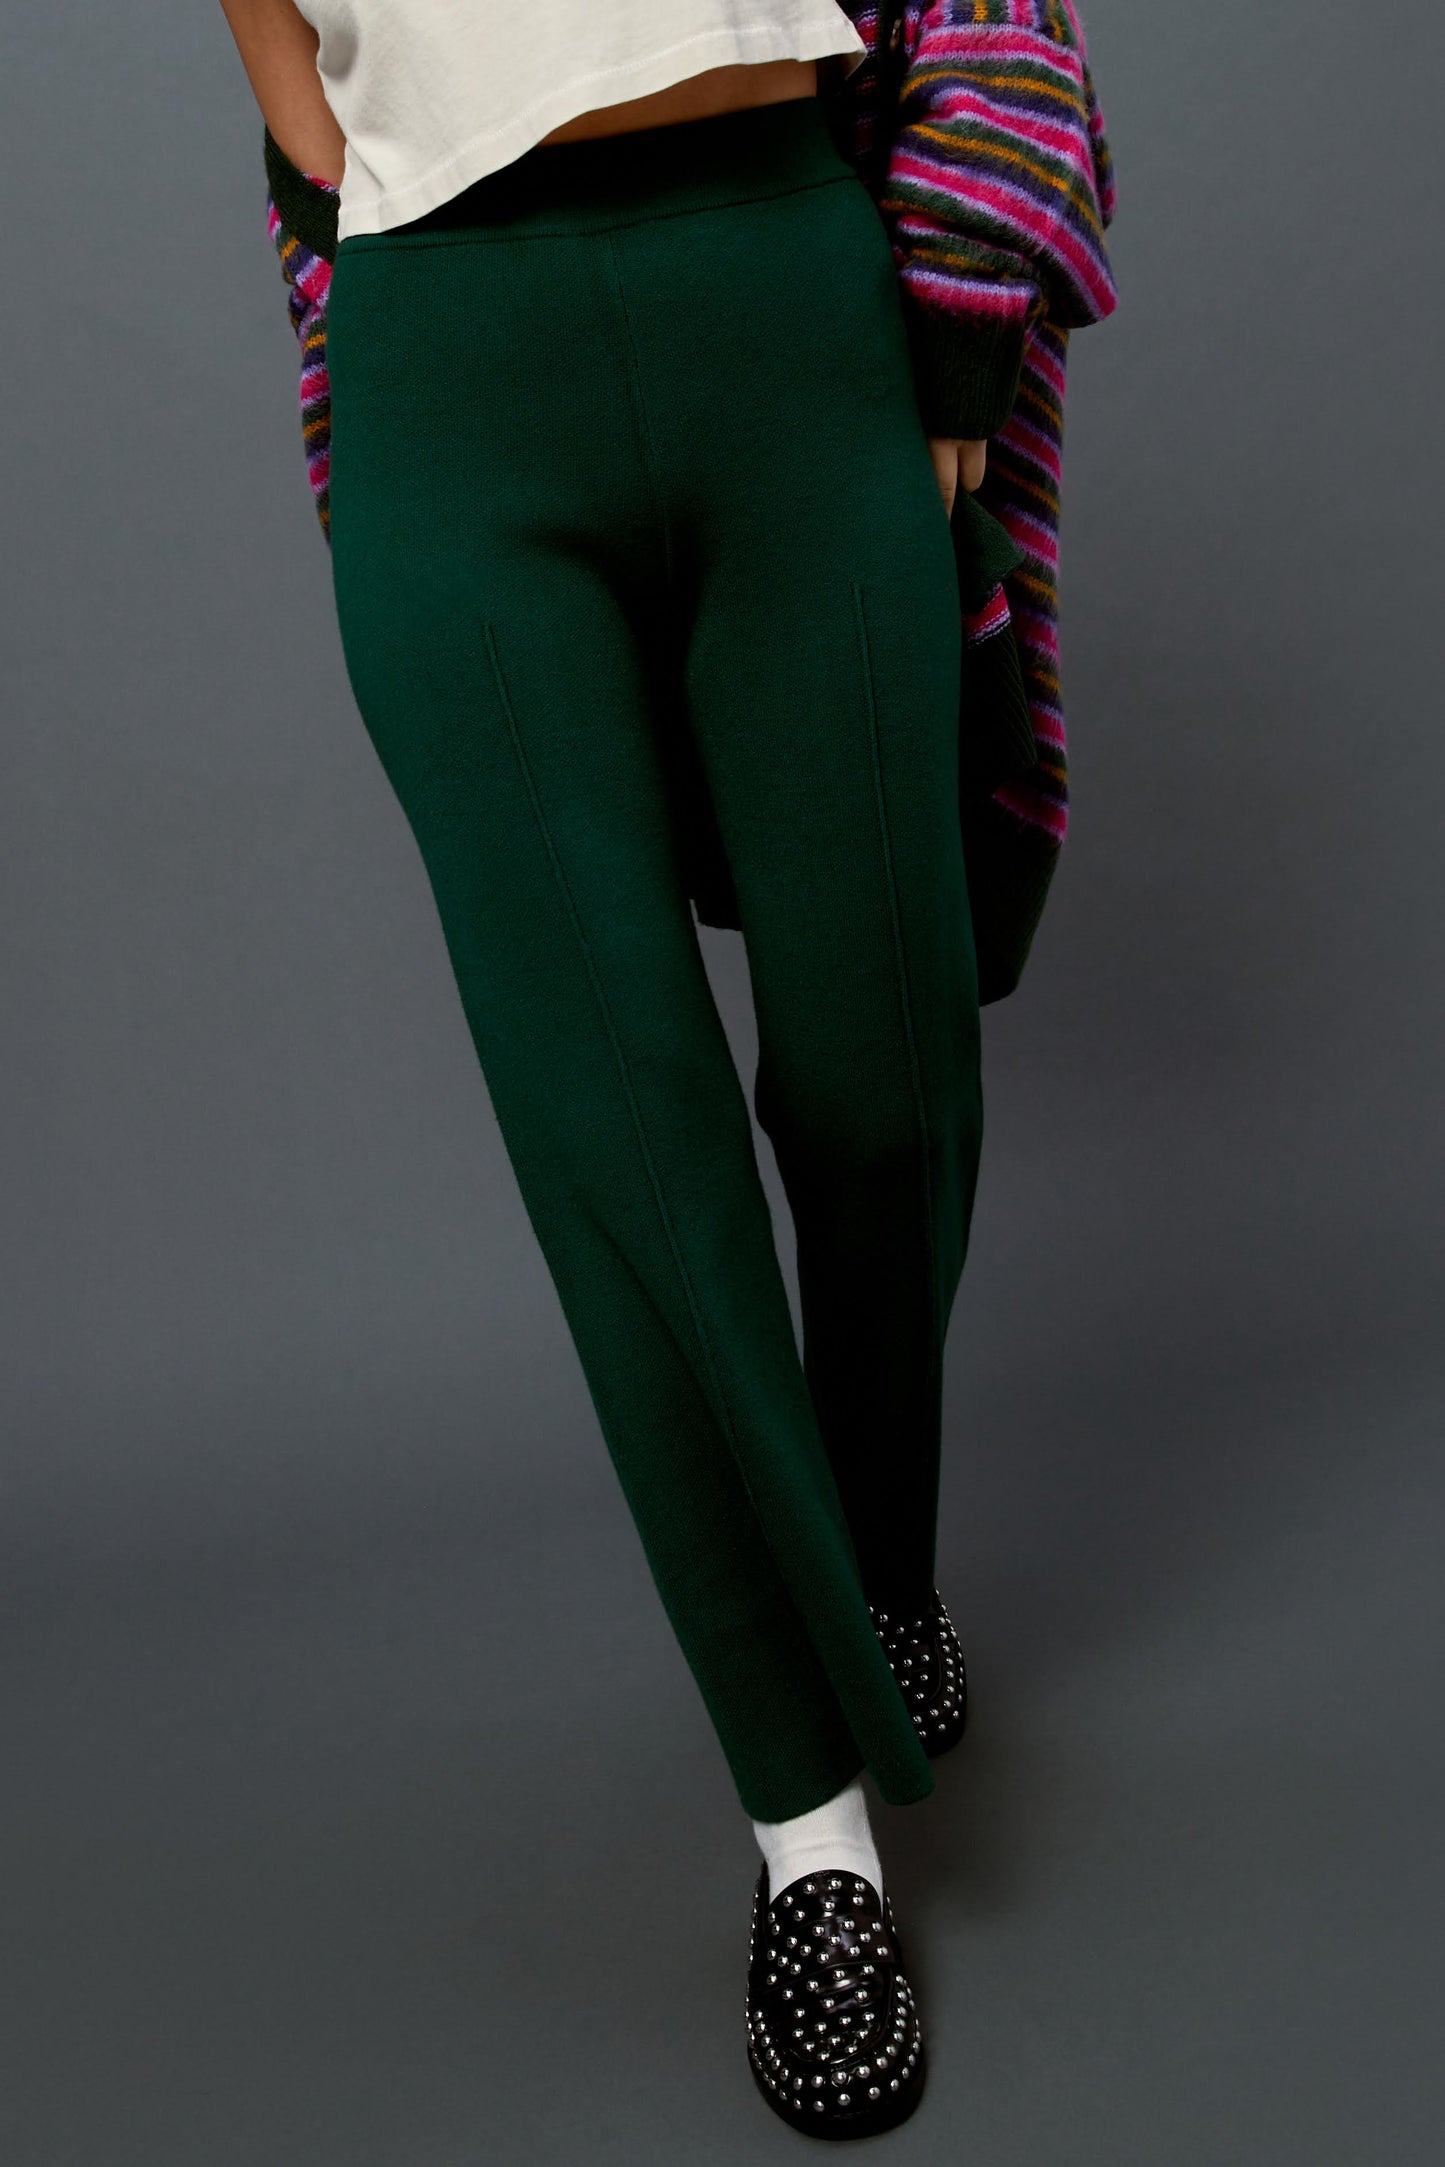 Model wearing a pair of knit pintuck pants in hunter green